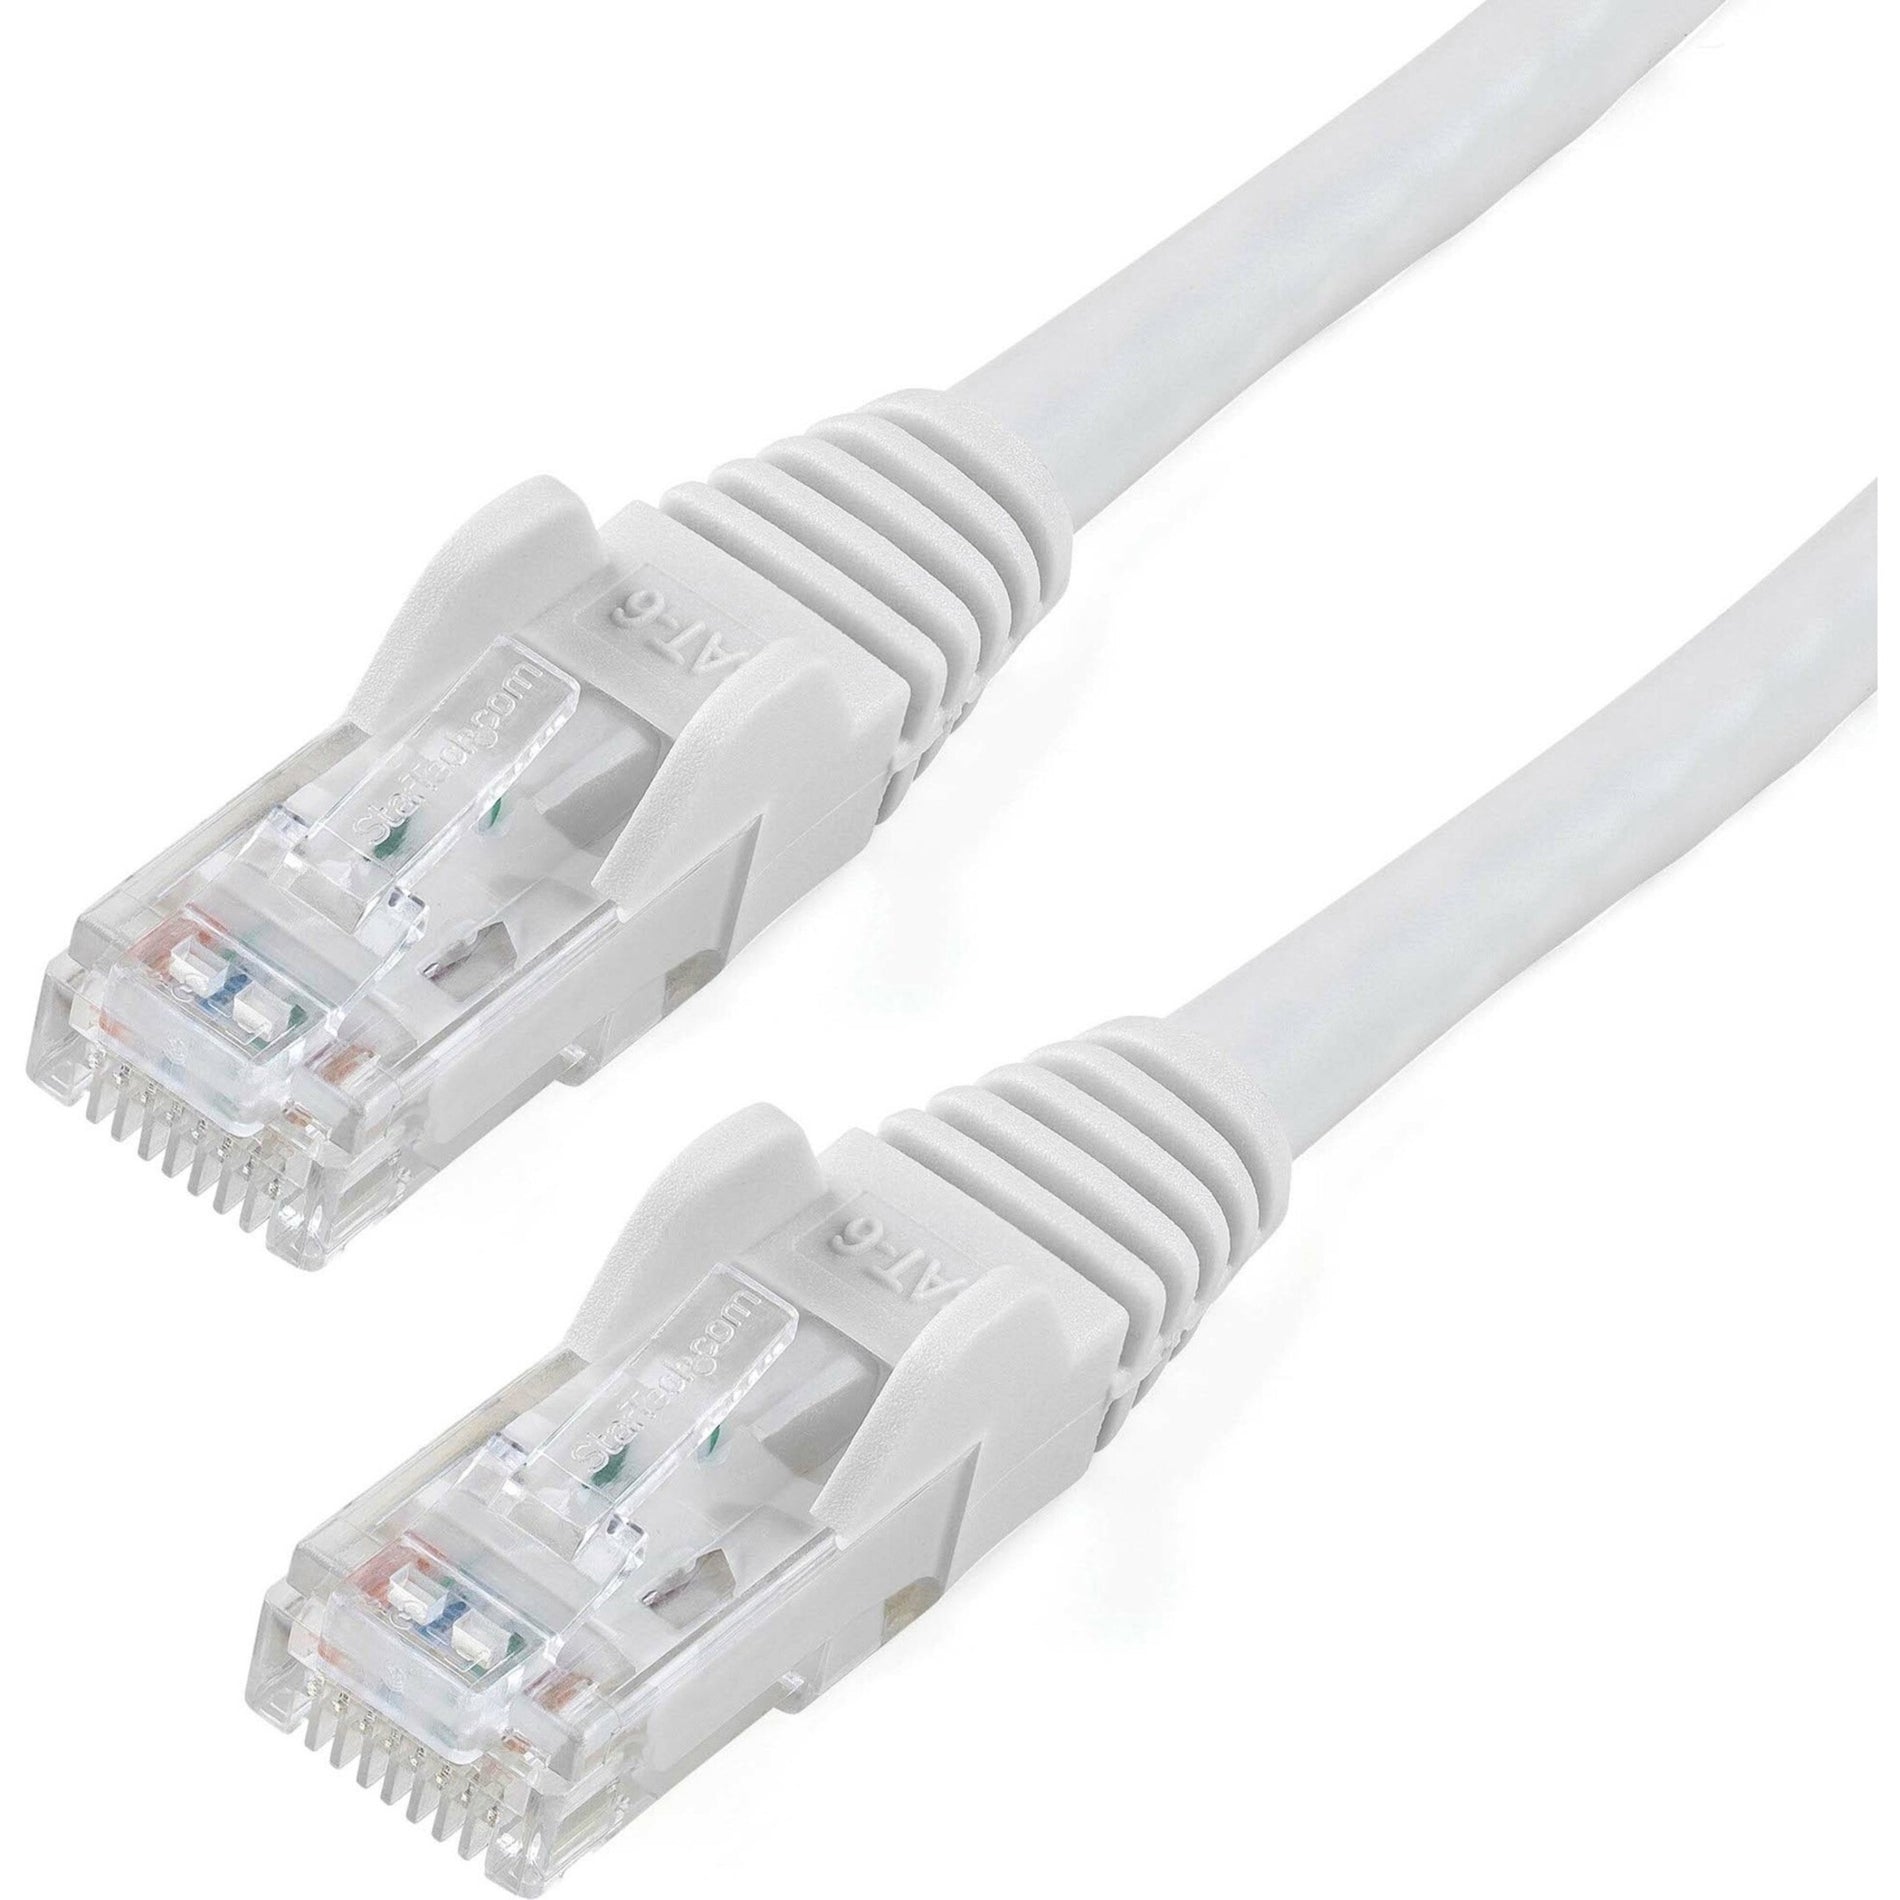 StarTech.com N6PATCH50WH 50 ft White Snagless Cat6 UTP Patch Cable - ETL Verified, Lifetime Warranty, 10 Gbit/s Data Transfer Rate